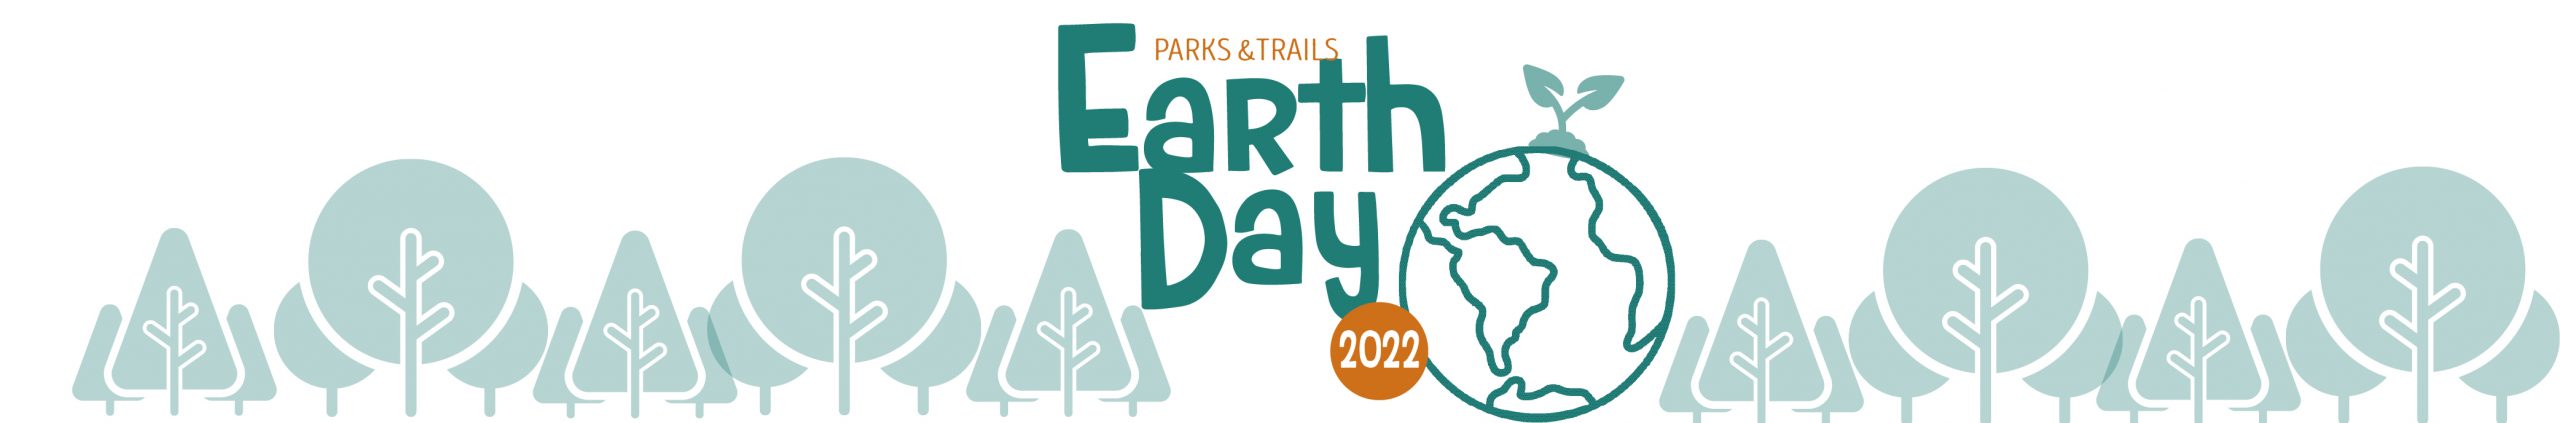 Parks & Trails Earth Day